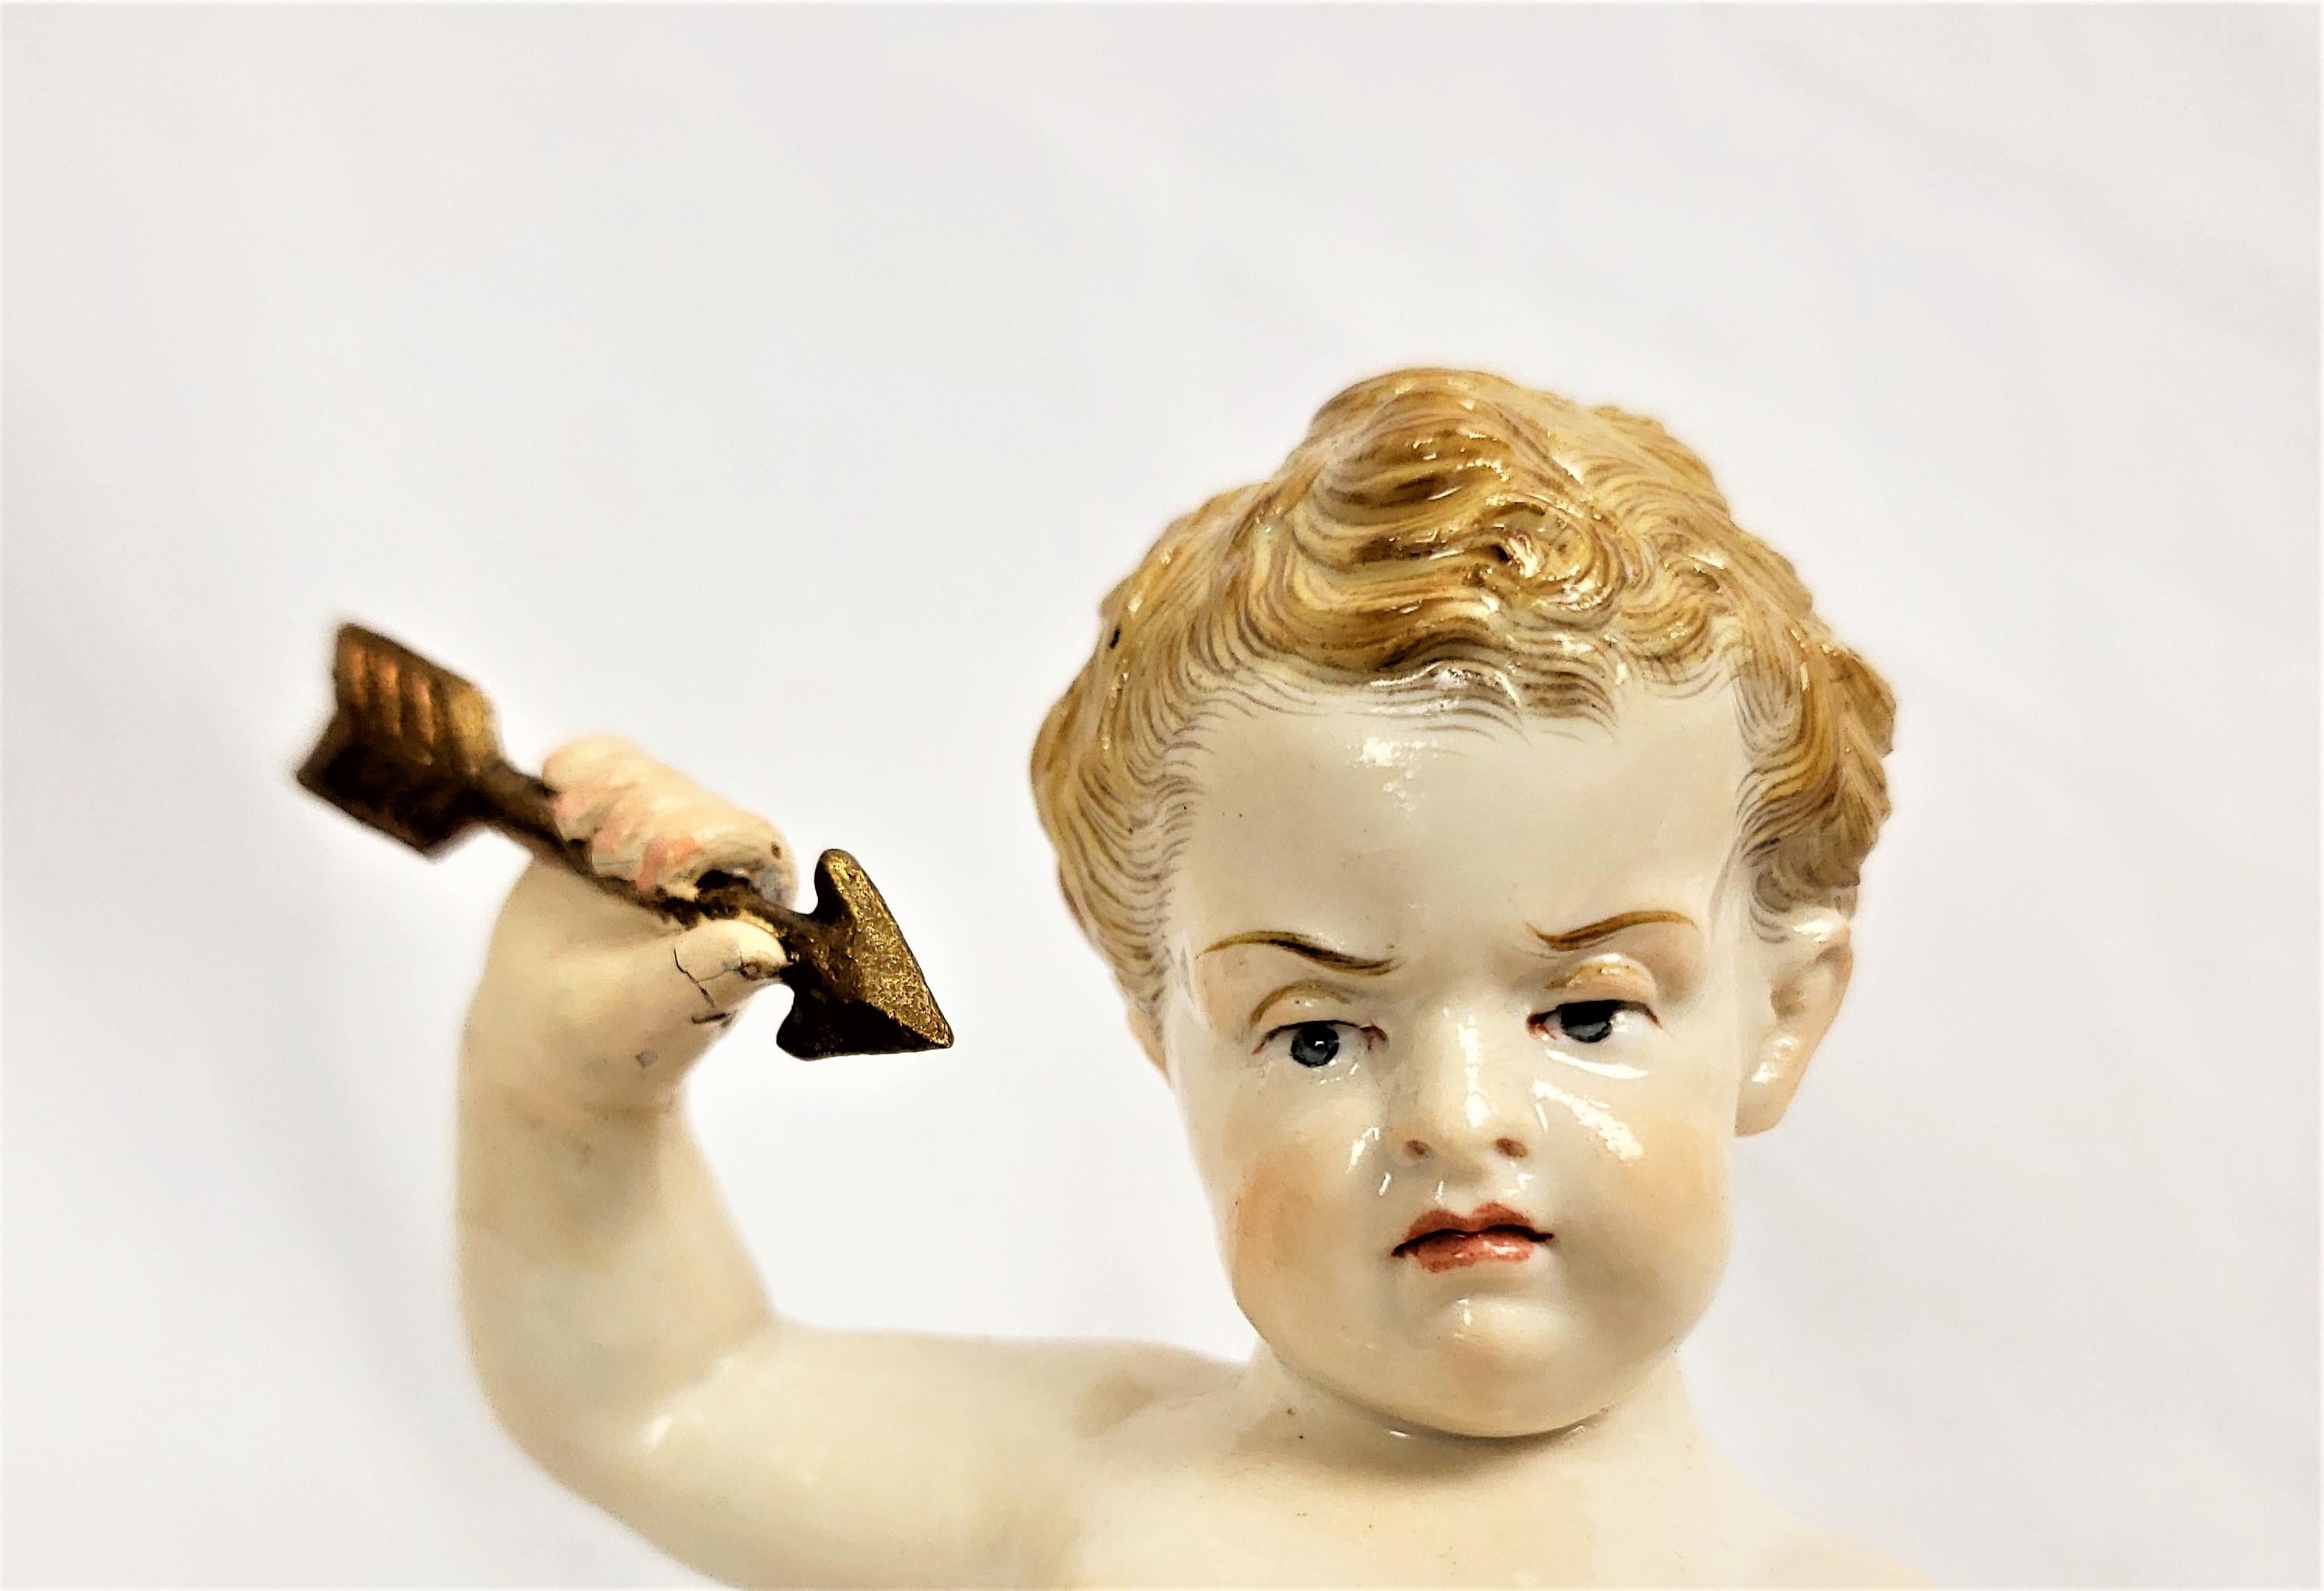 Antique Meissen Porcelain Figurine of Cupid Holding an Arrow & Flaming Heart For Sale 1